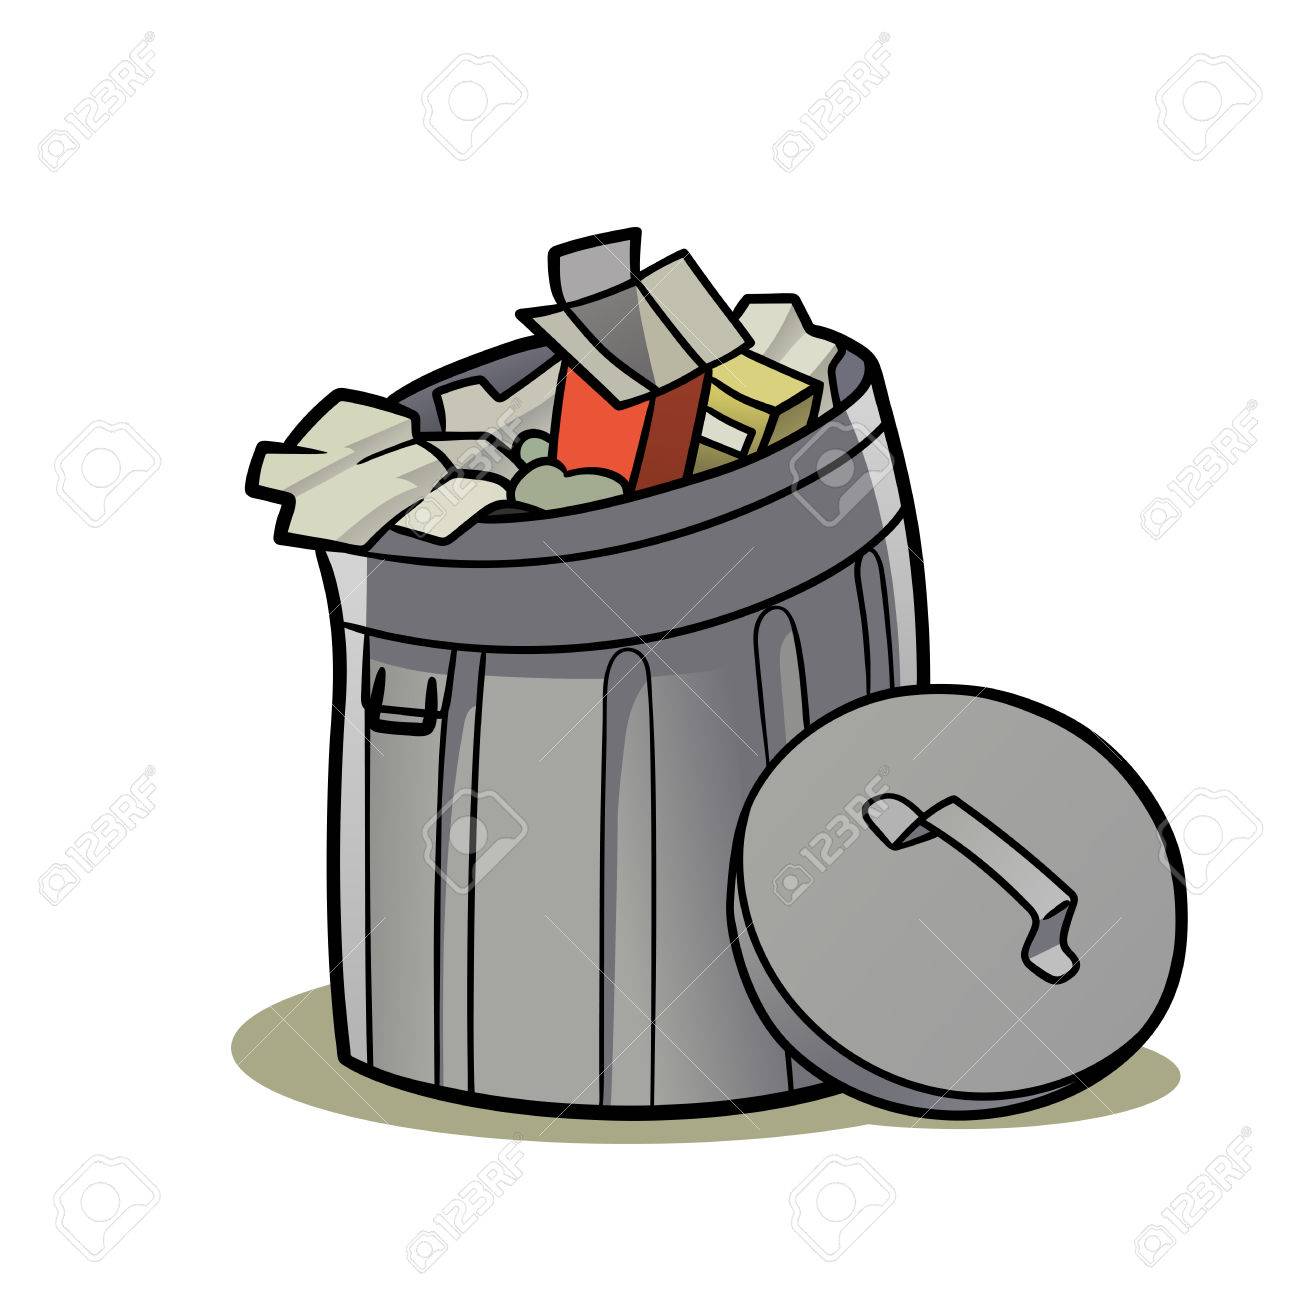 garbage clipart unhygienic